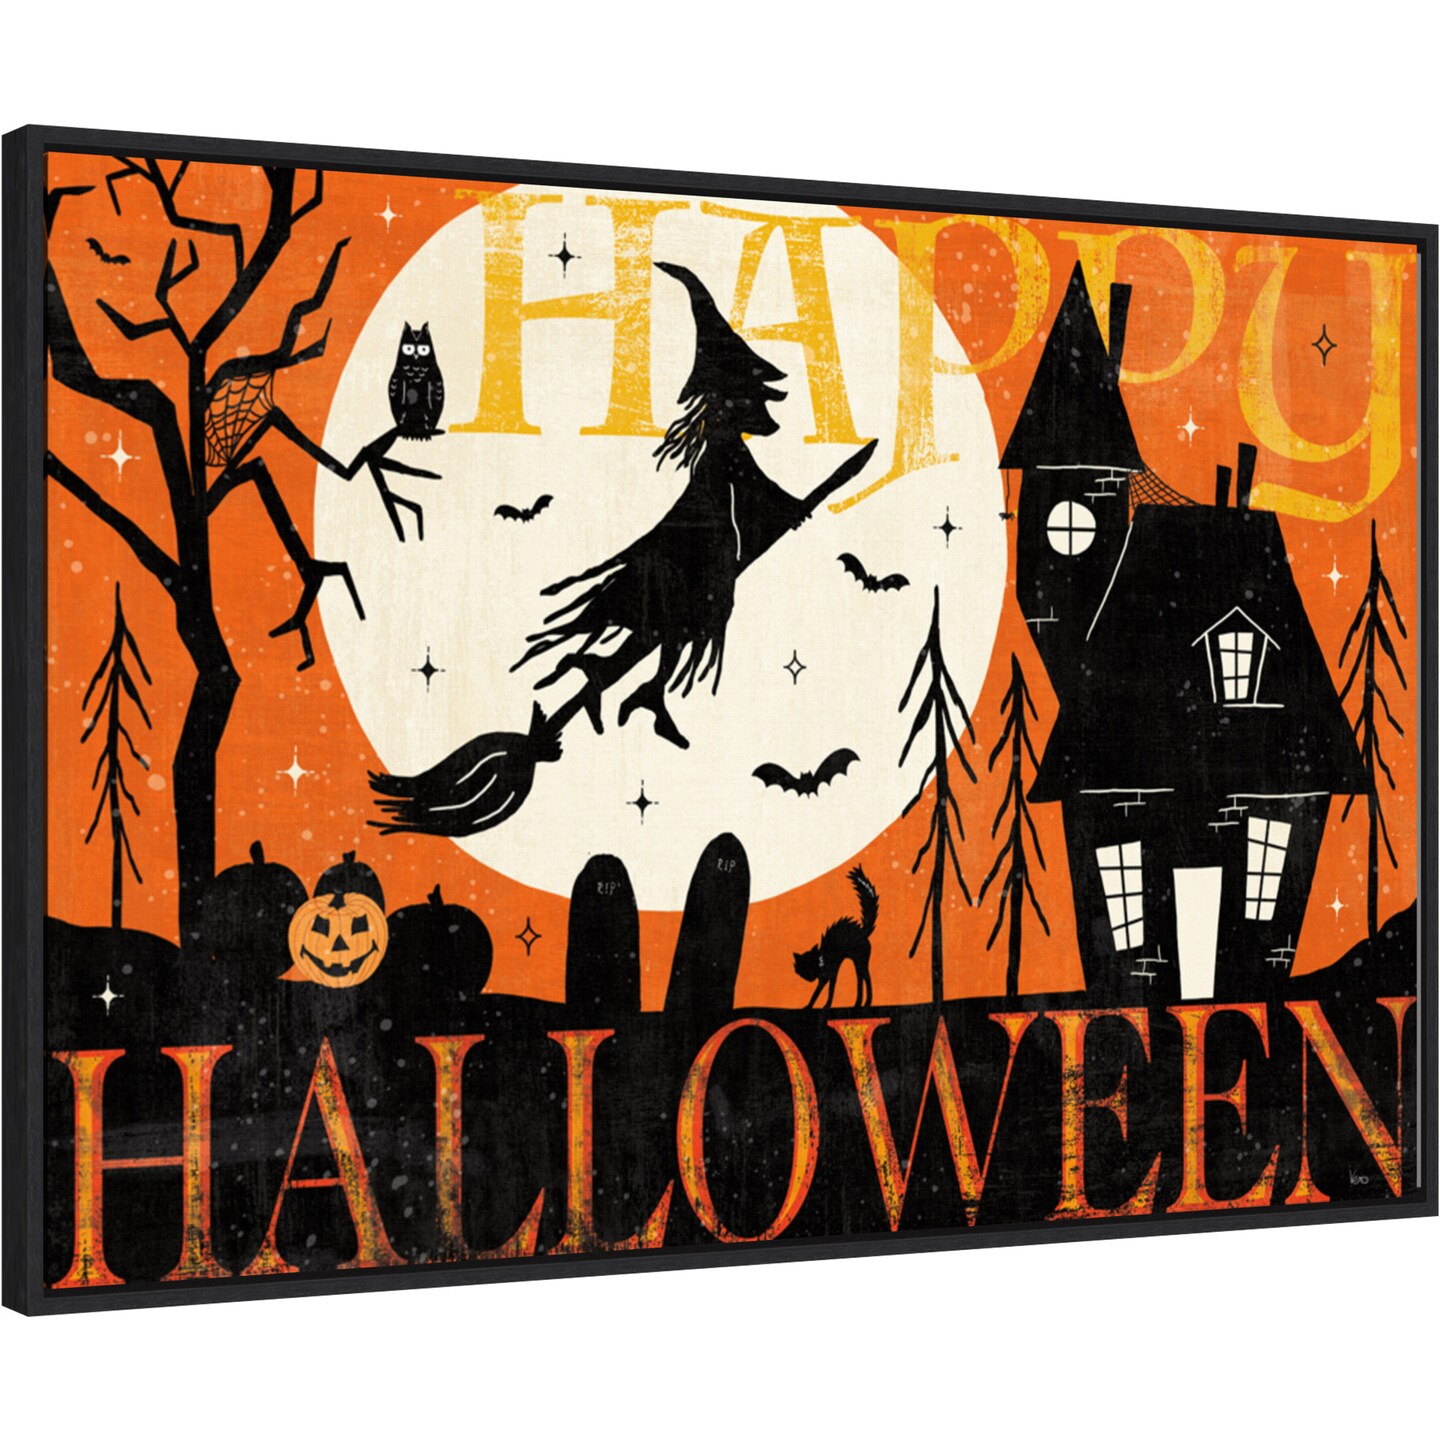 Halloween is Calling I by Veronique Charron 33-in. W x 23-in. H. Canvas Wall Art Print Framed in Black